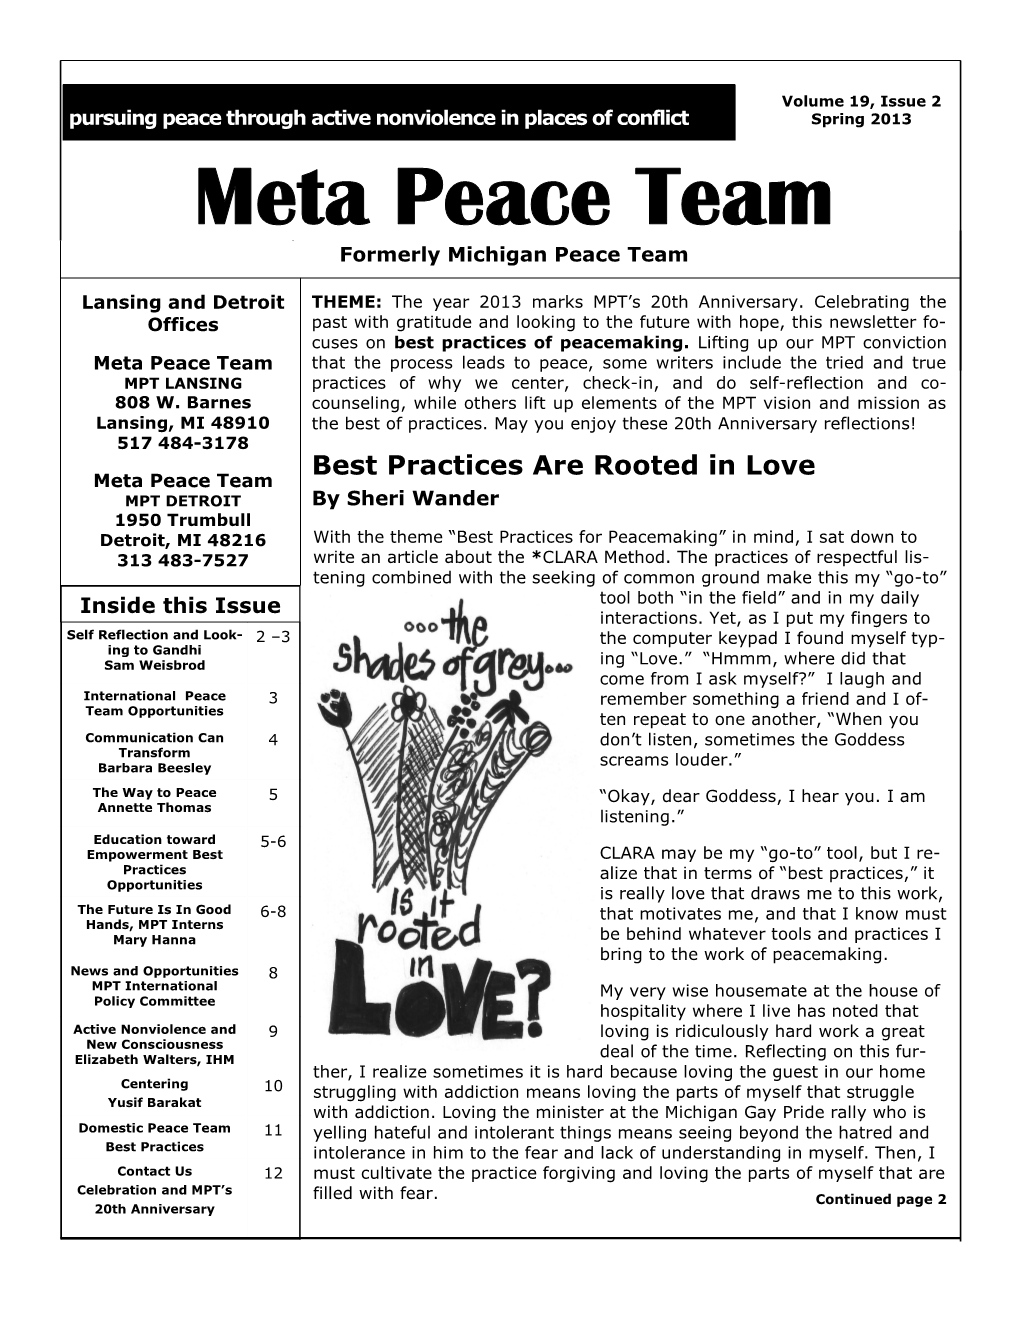 Meta Peace Team Formerly Michigan Peace Team Lansing and Detroit THEME: the Year 2013 Marks MPT’S 20Th Anniversary